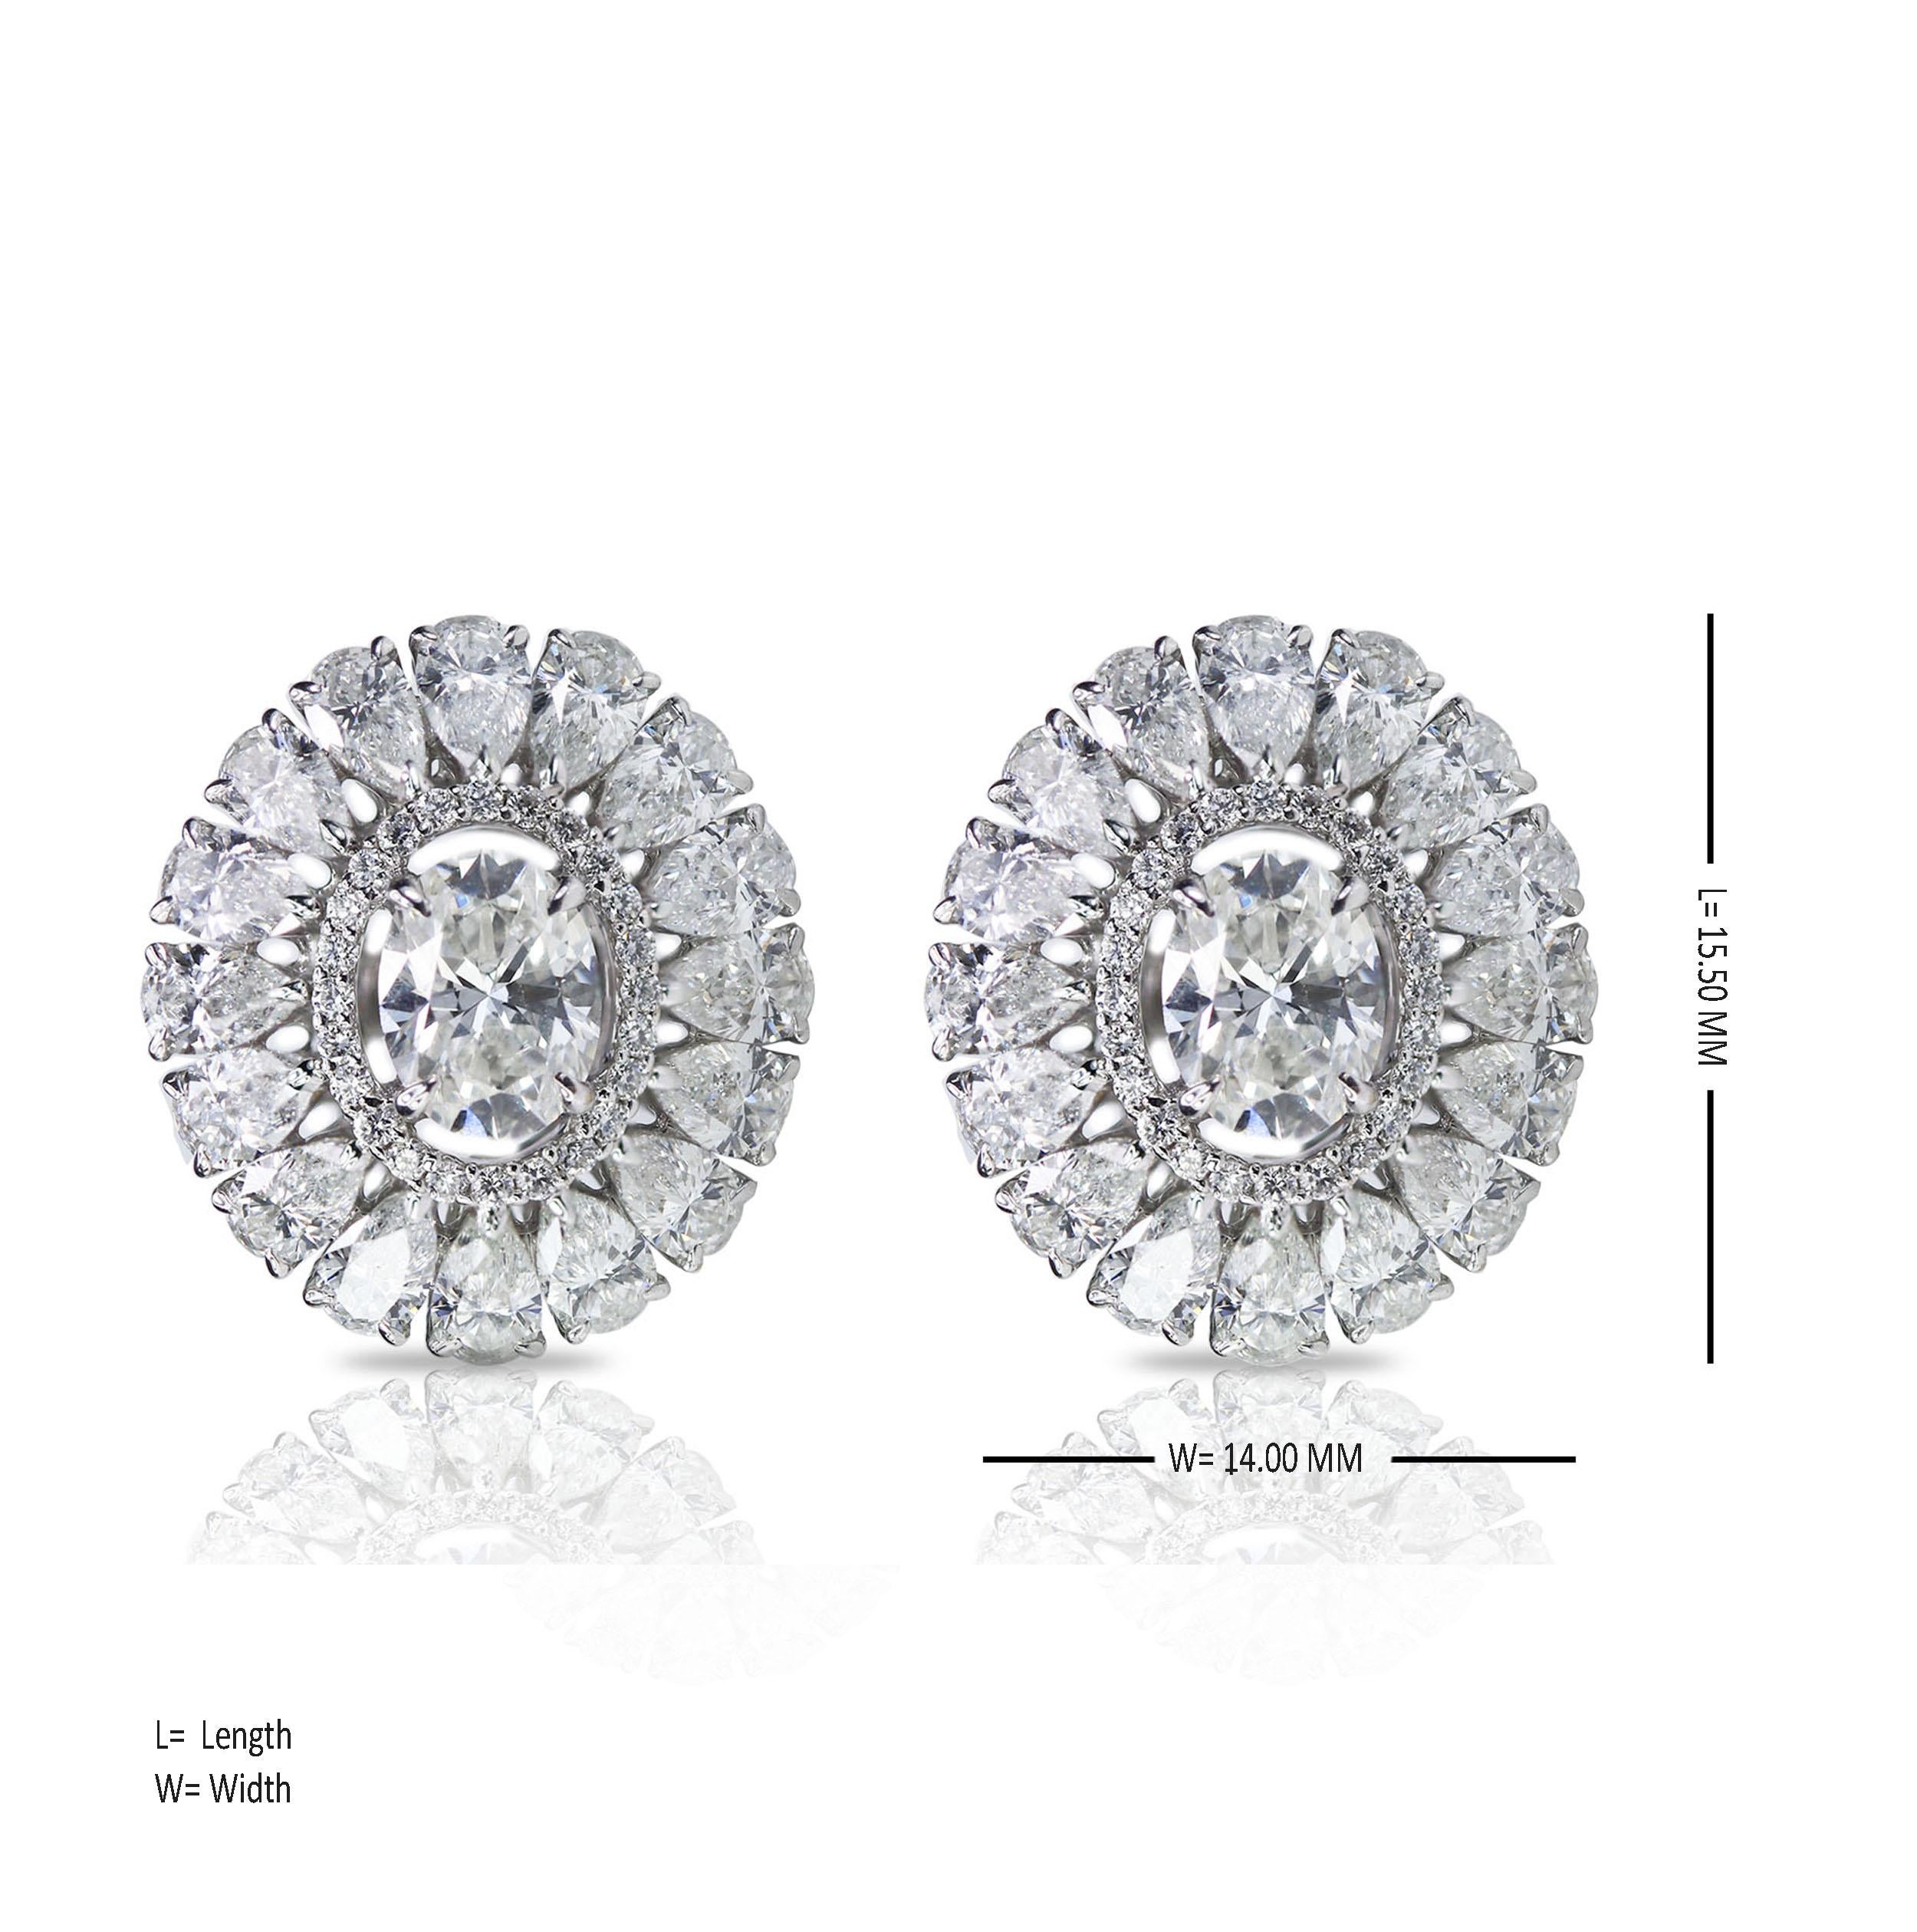 Studio Rêves Oval and Pear Diamond Stud Earrings in 18 Karat White Gold In New Condition For Sale In Mumbai, Maharashtra